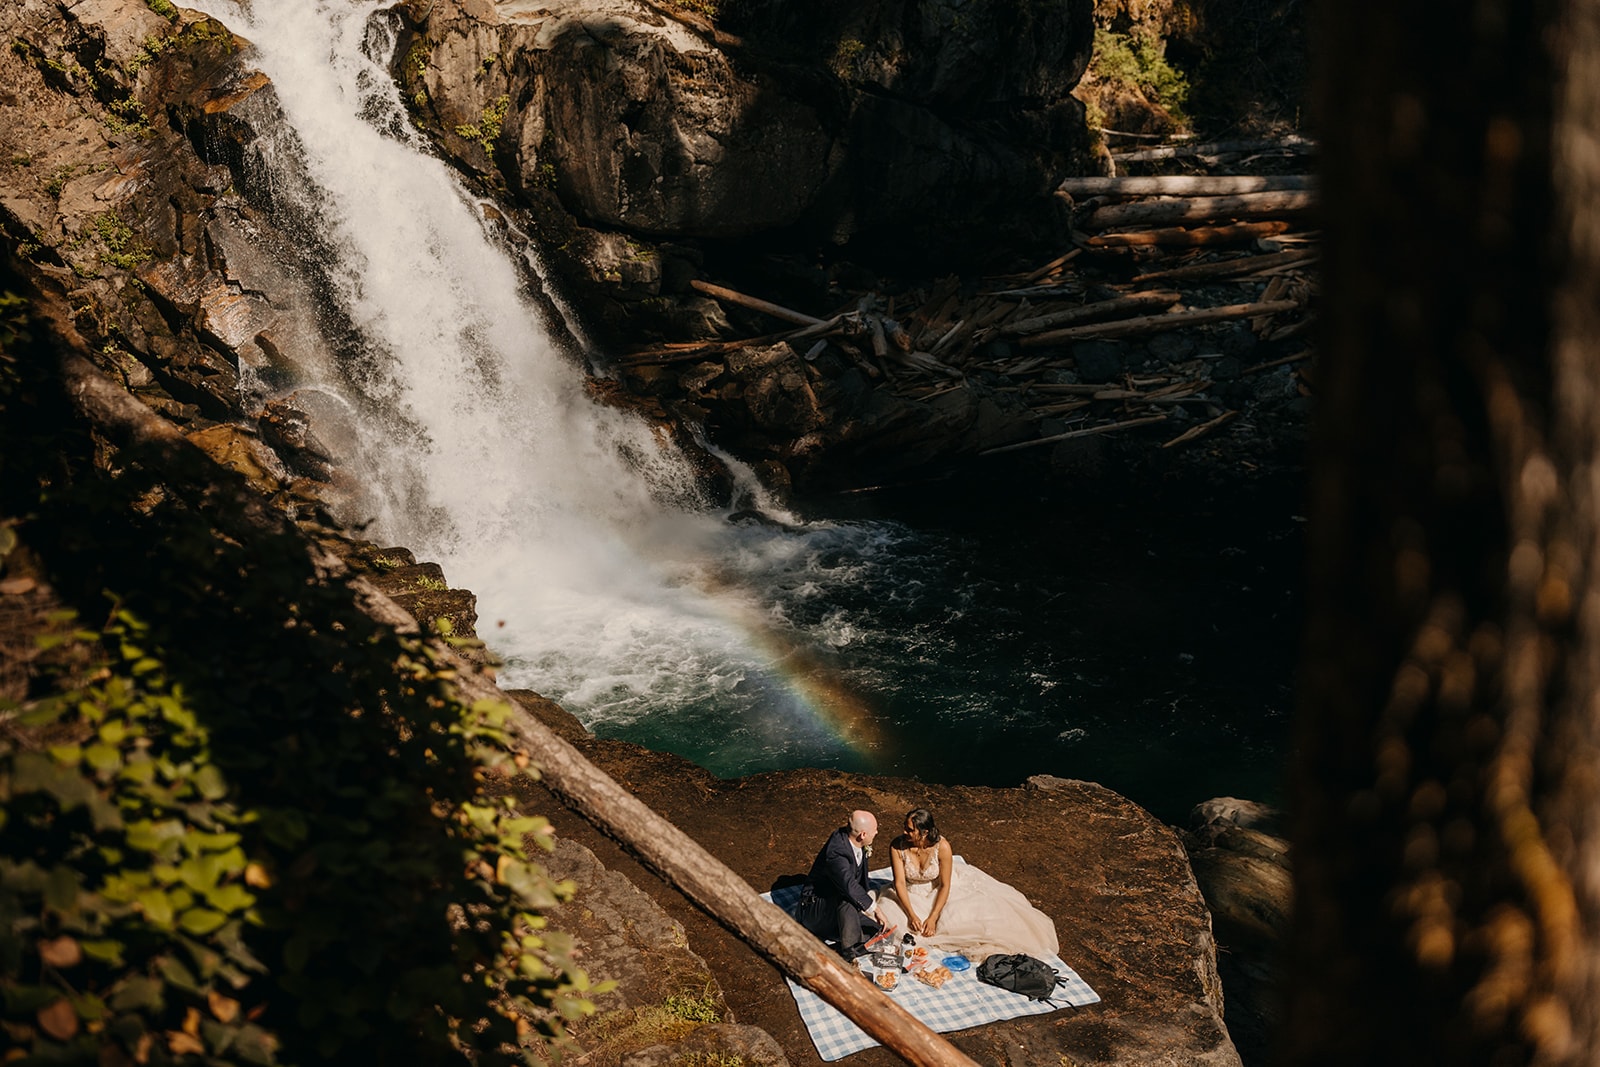 A couple sits together at a waterfall having a picnic.